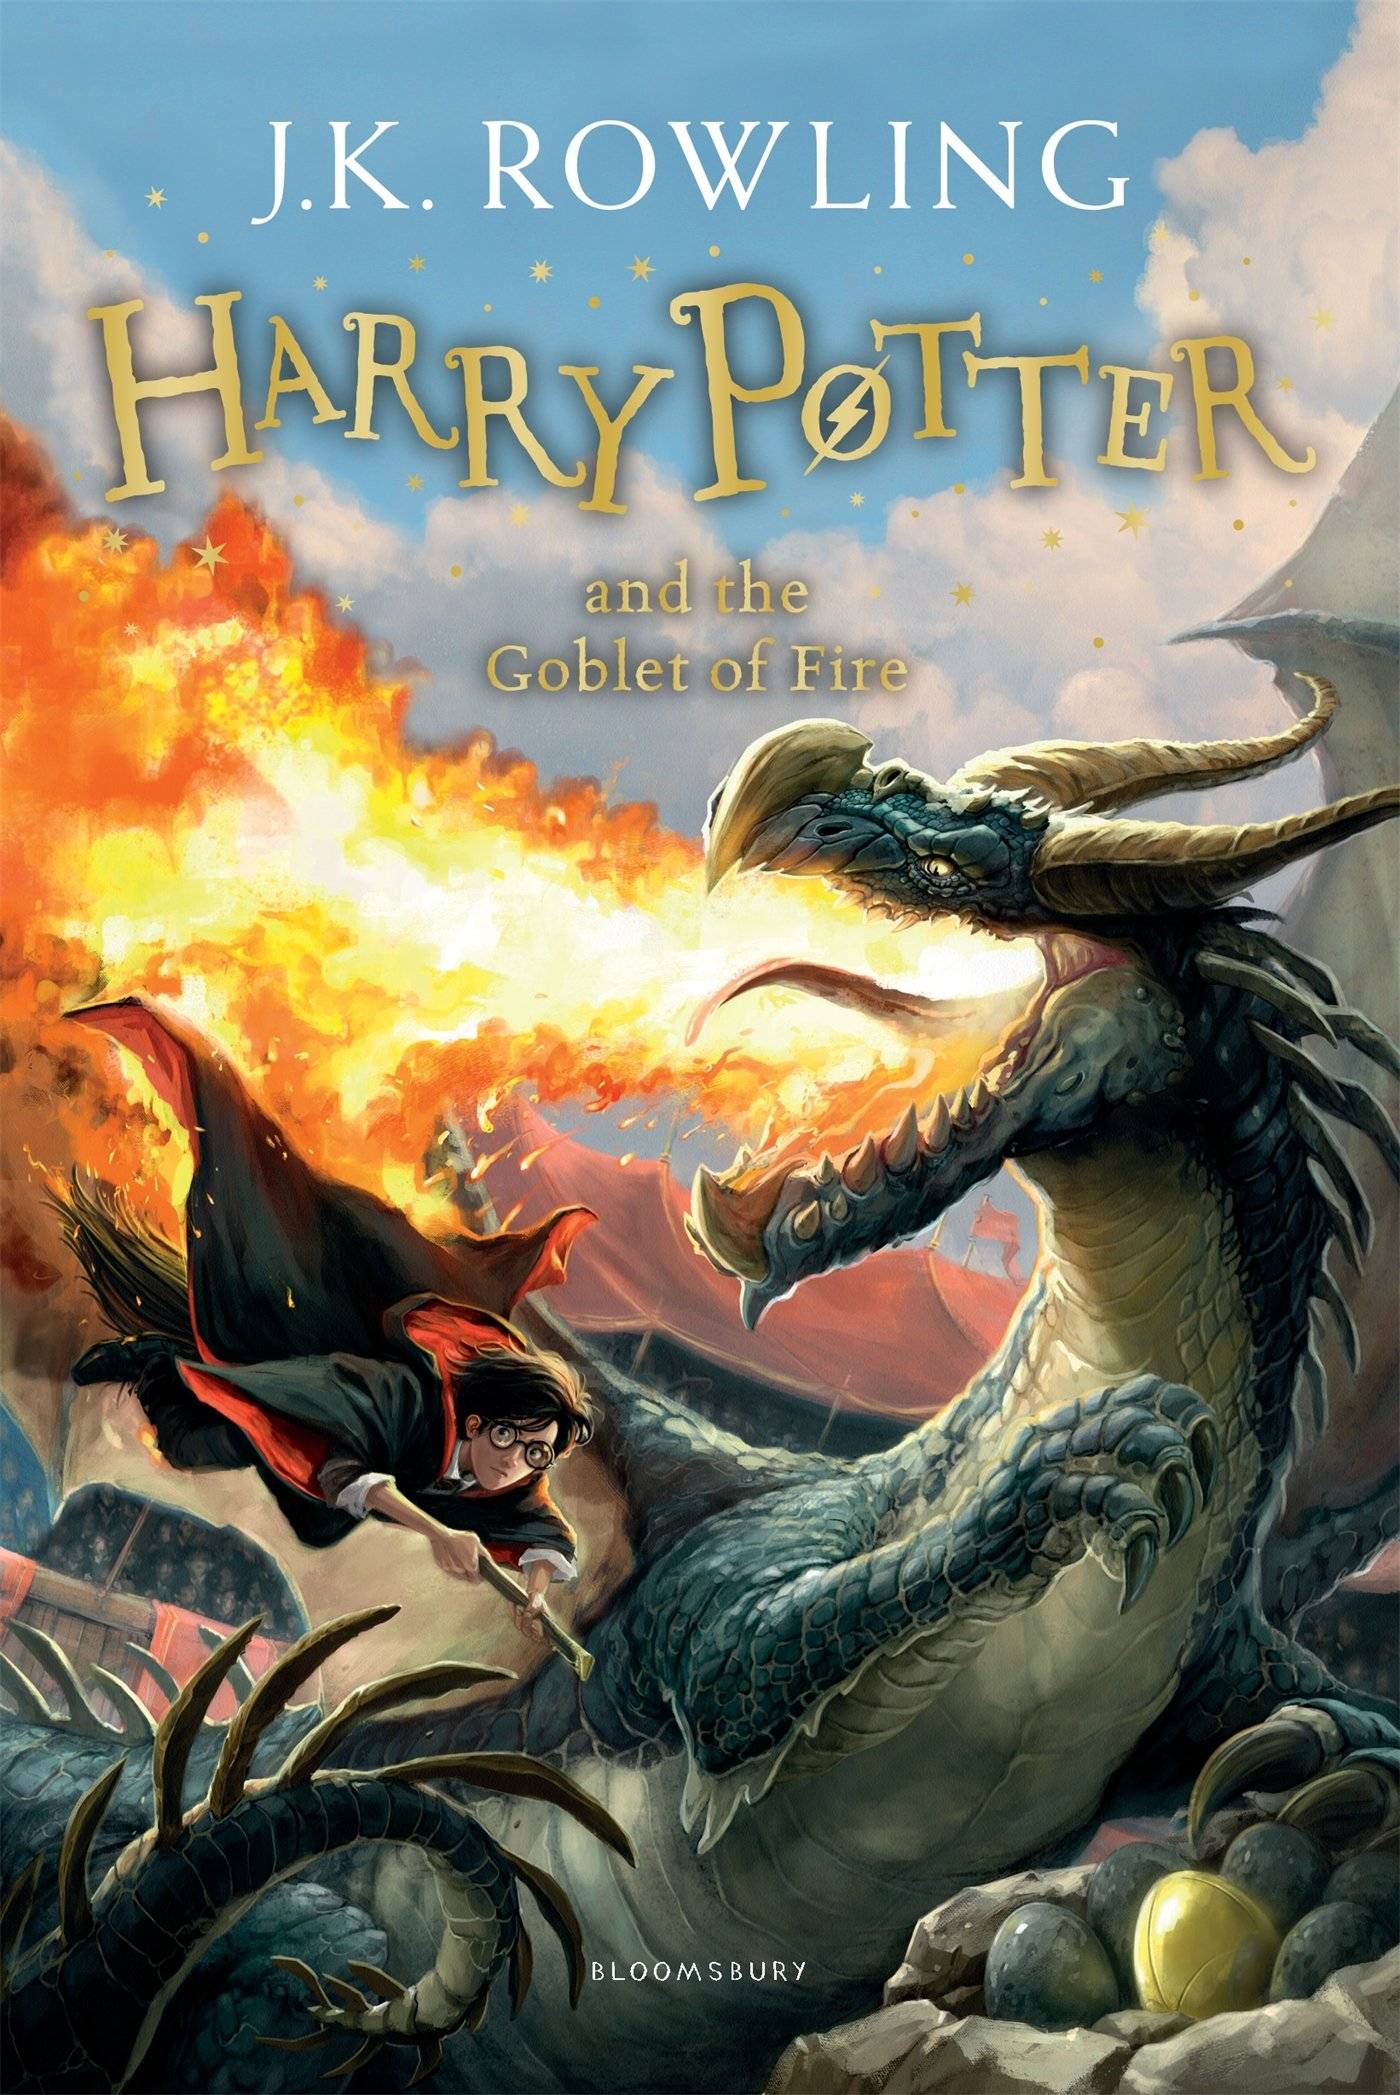 IMG : Harry Potter and the Goblet of fire